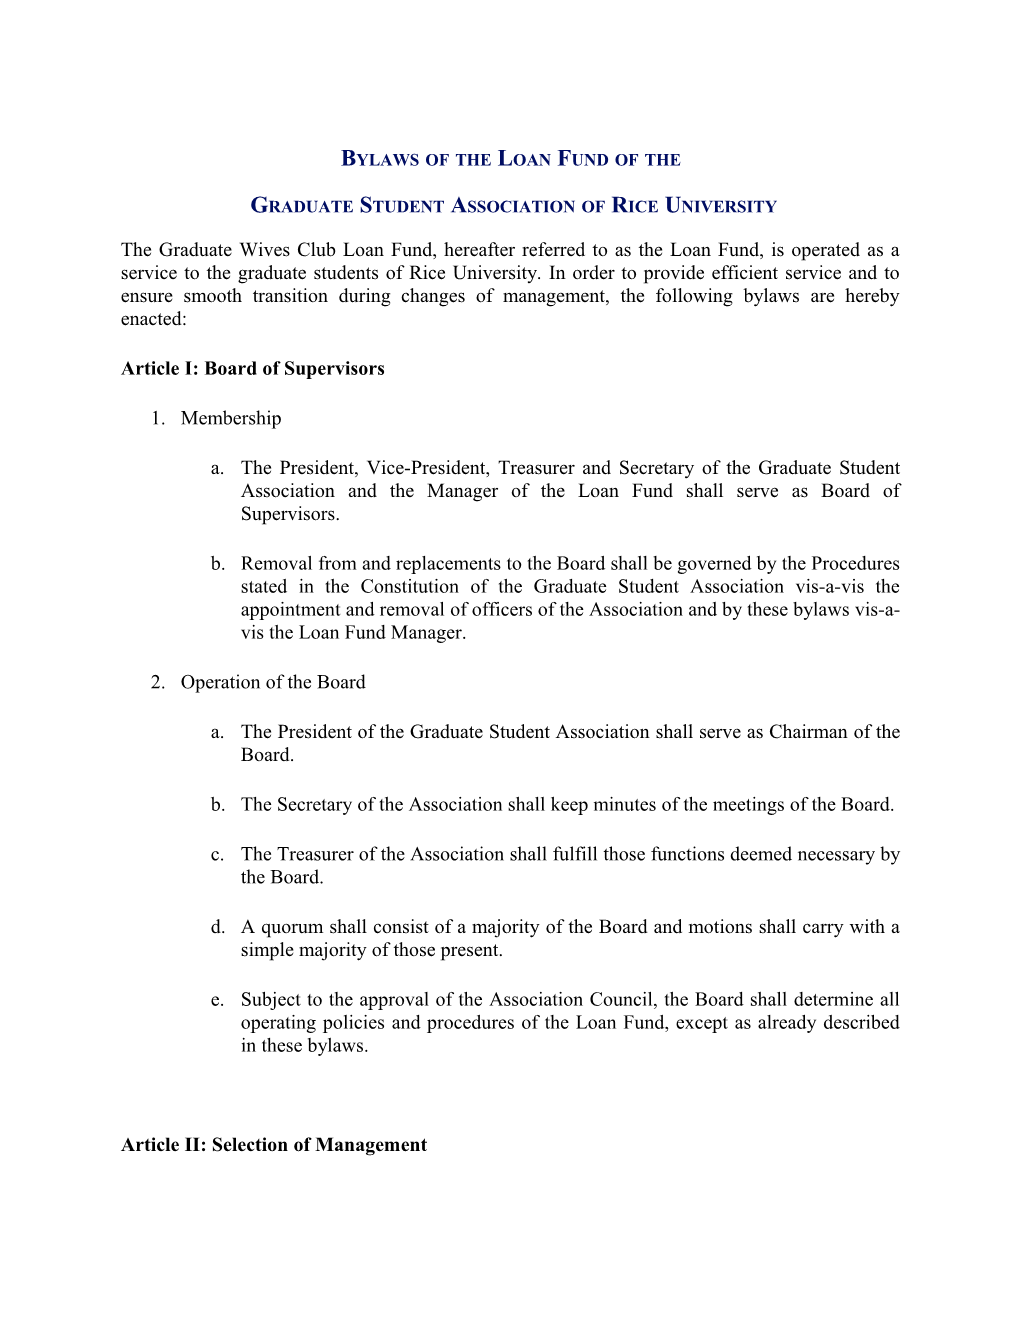 Bylaws of the Loan Fund of The